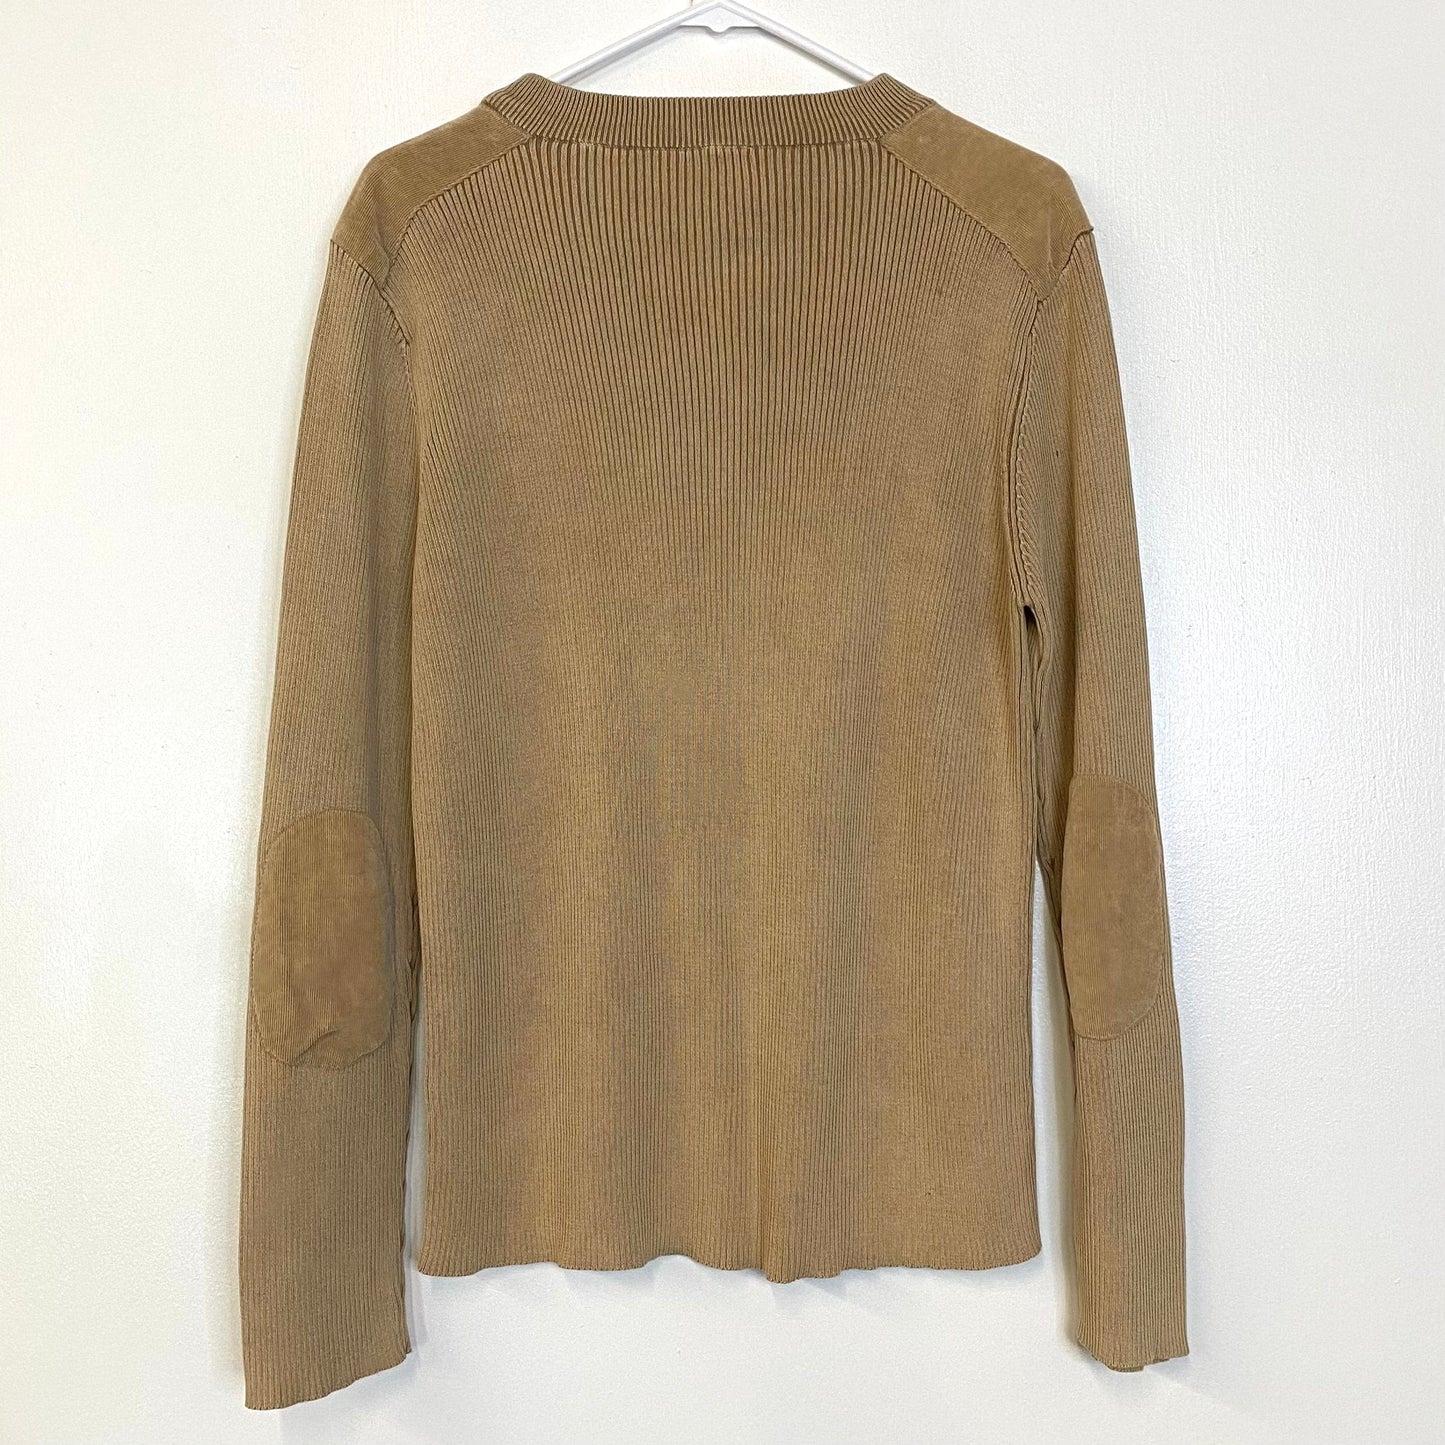 Stylish J.Crew Mens Size XL Beige Sweater w/Corduroy Patches L/s Pre-Owned